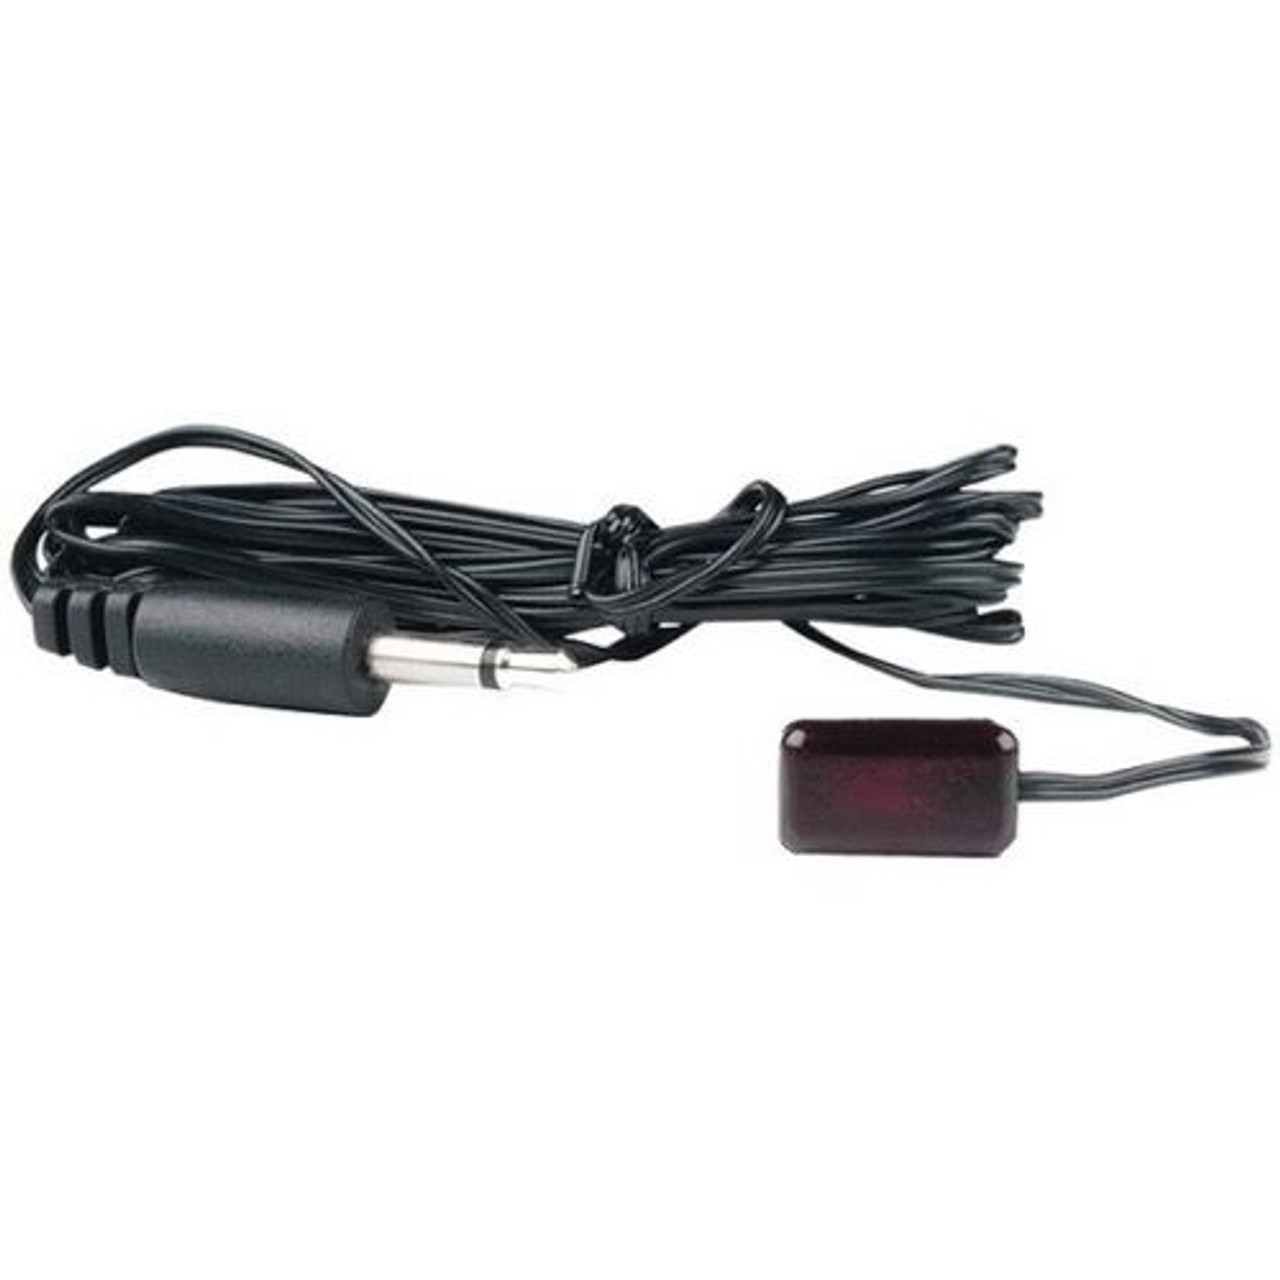 Linear Technology 2171 Single Eye Head IR Signal Emitter 5V and 12V 5' FT Cord Infrared Remote Repeater/Emitter Micro Head 5 Volt and 12 Volt Compatible Video Distribution Amplifier Systems, Part # CP2171